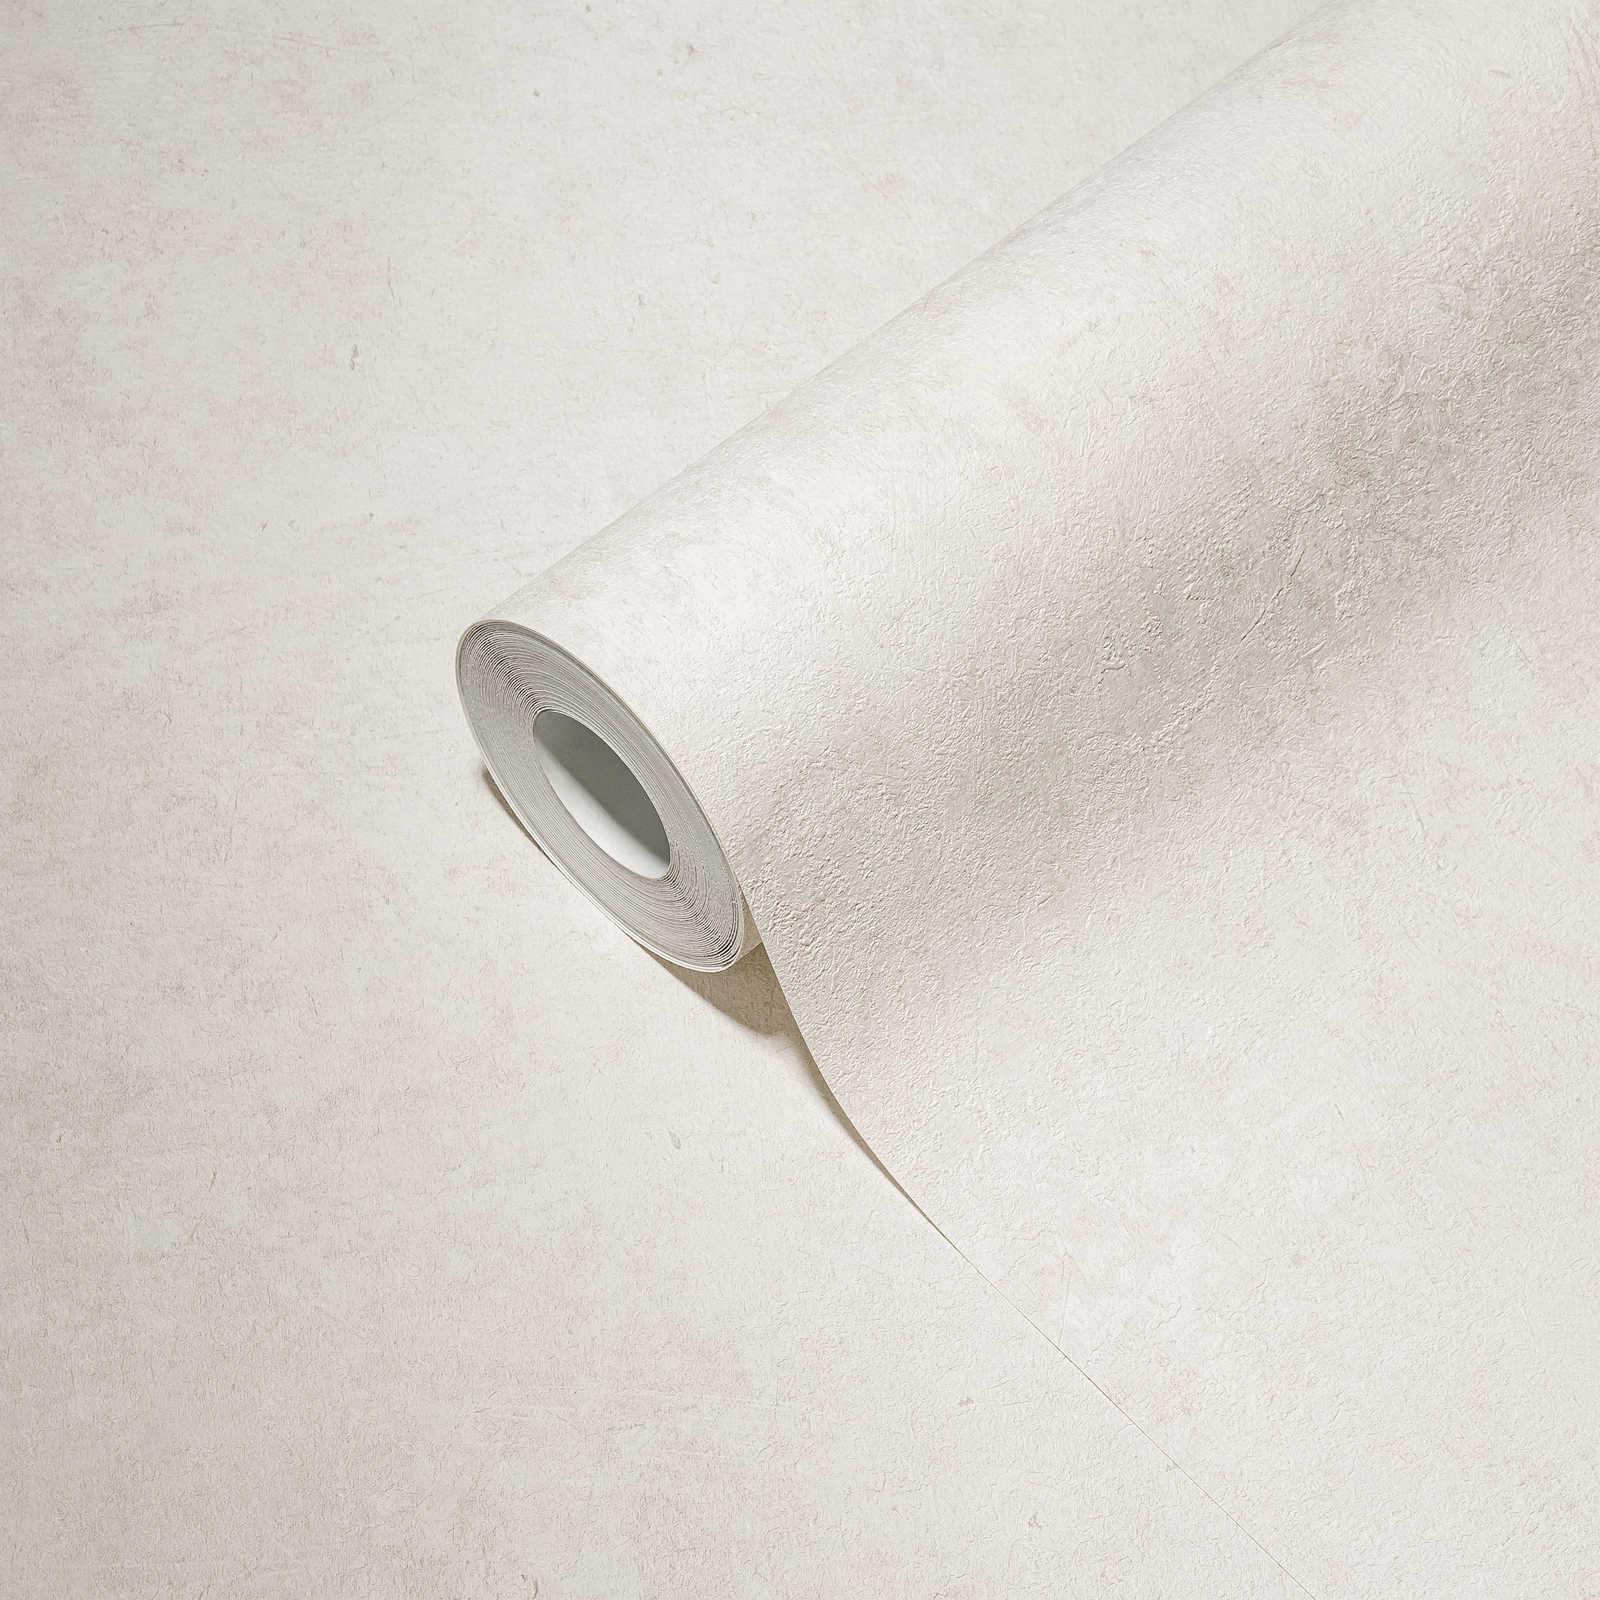             Non-woven wallpaper plain with textured pattern - white, light grey
        